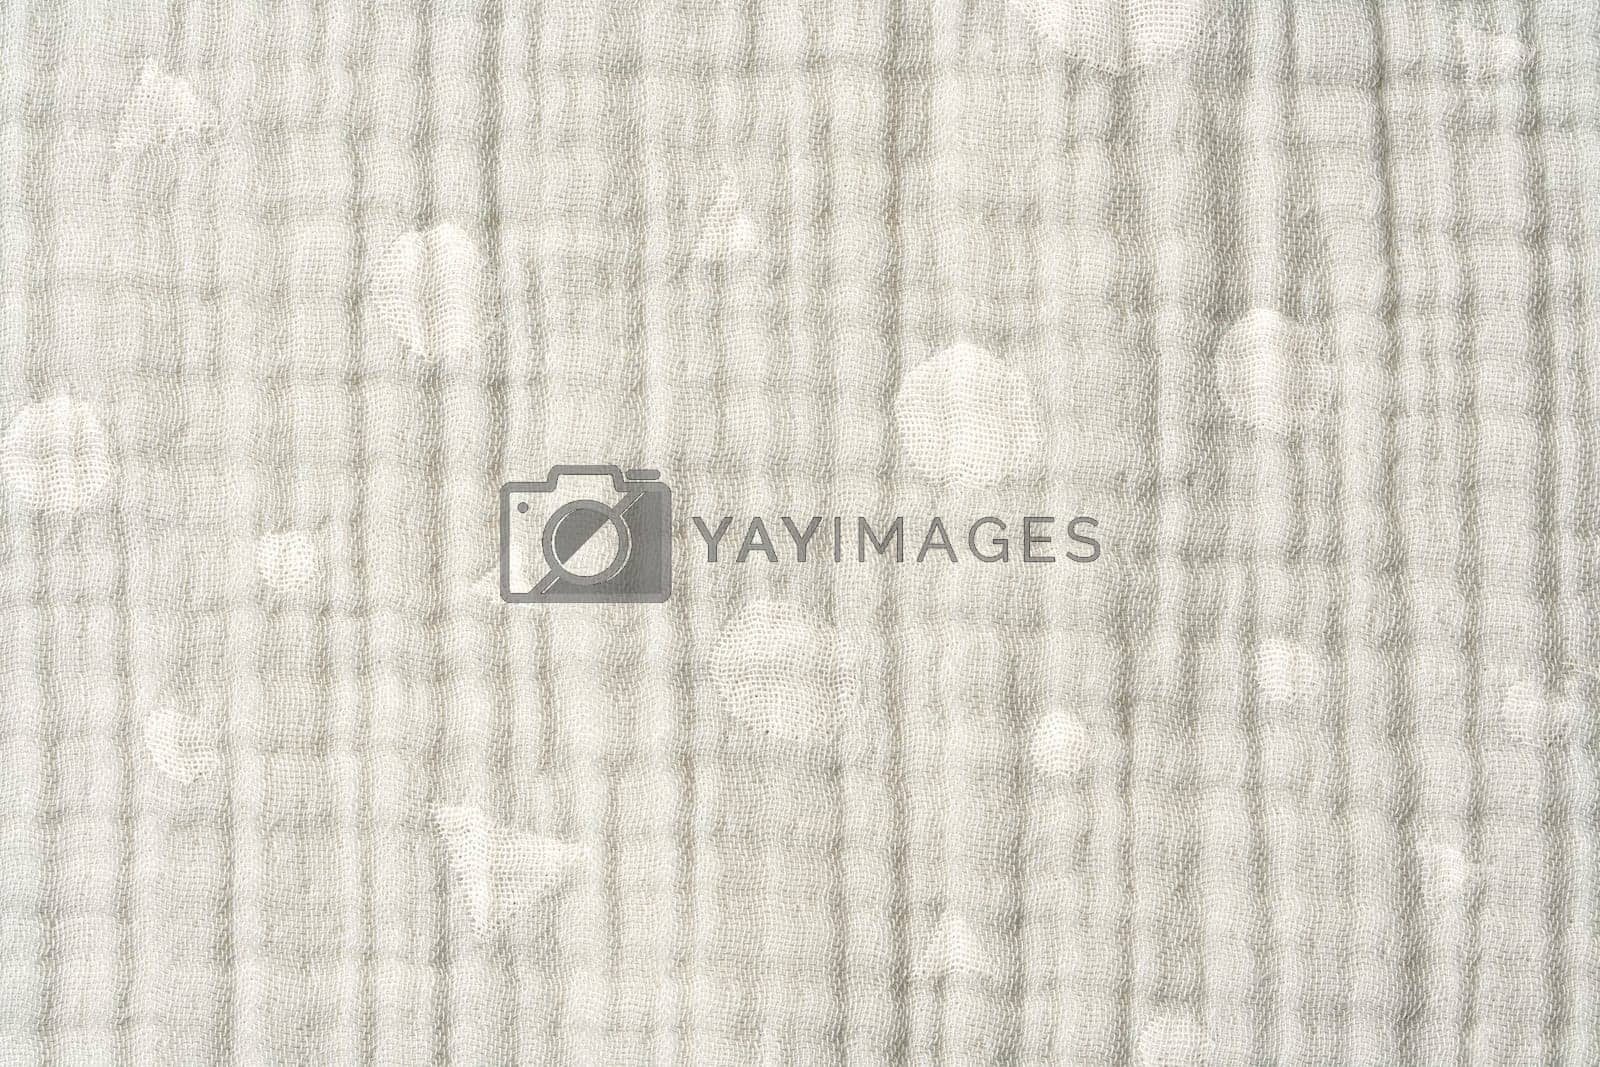 Royalty free image of Close up of muslin blanket texture background by Fabrikasimf